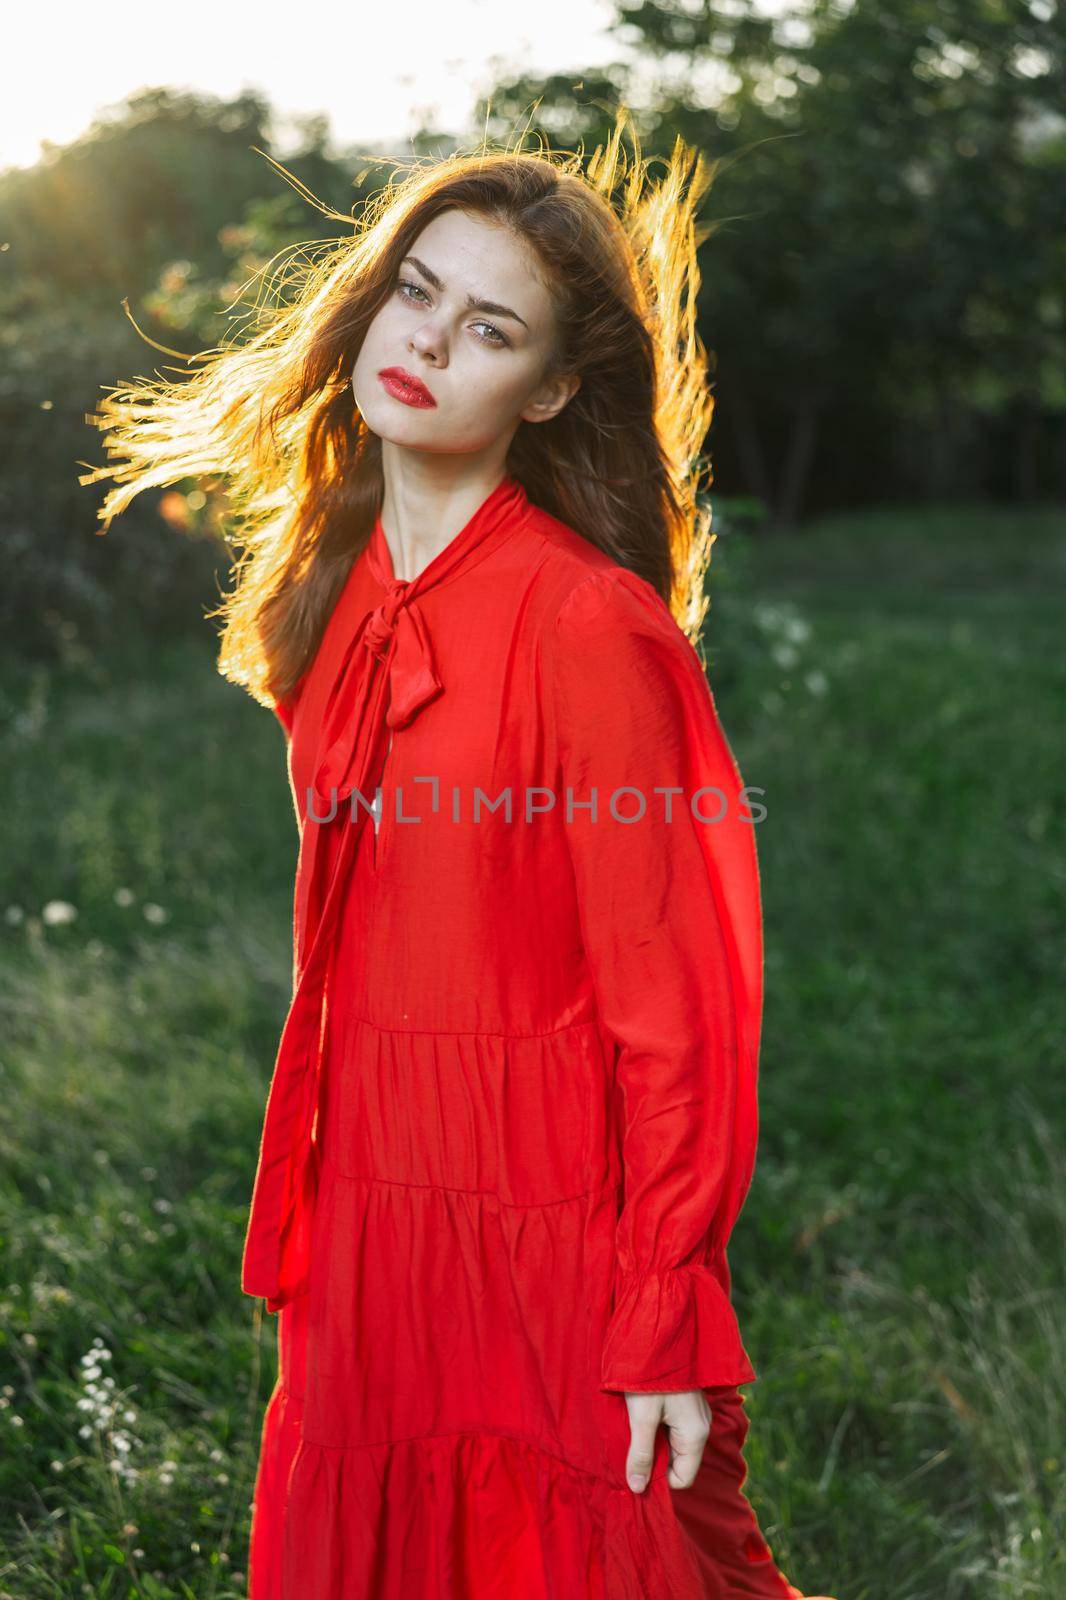 attractive woman in red dress outdoors in freedom field. High quality photo